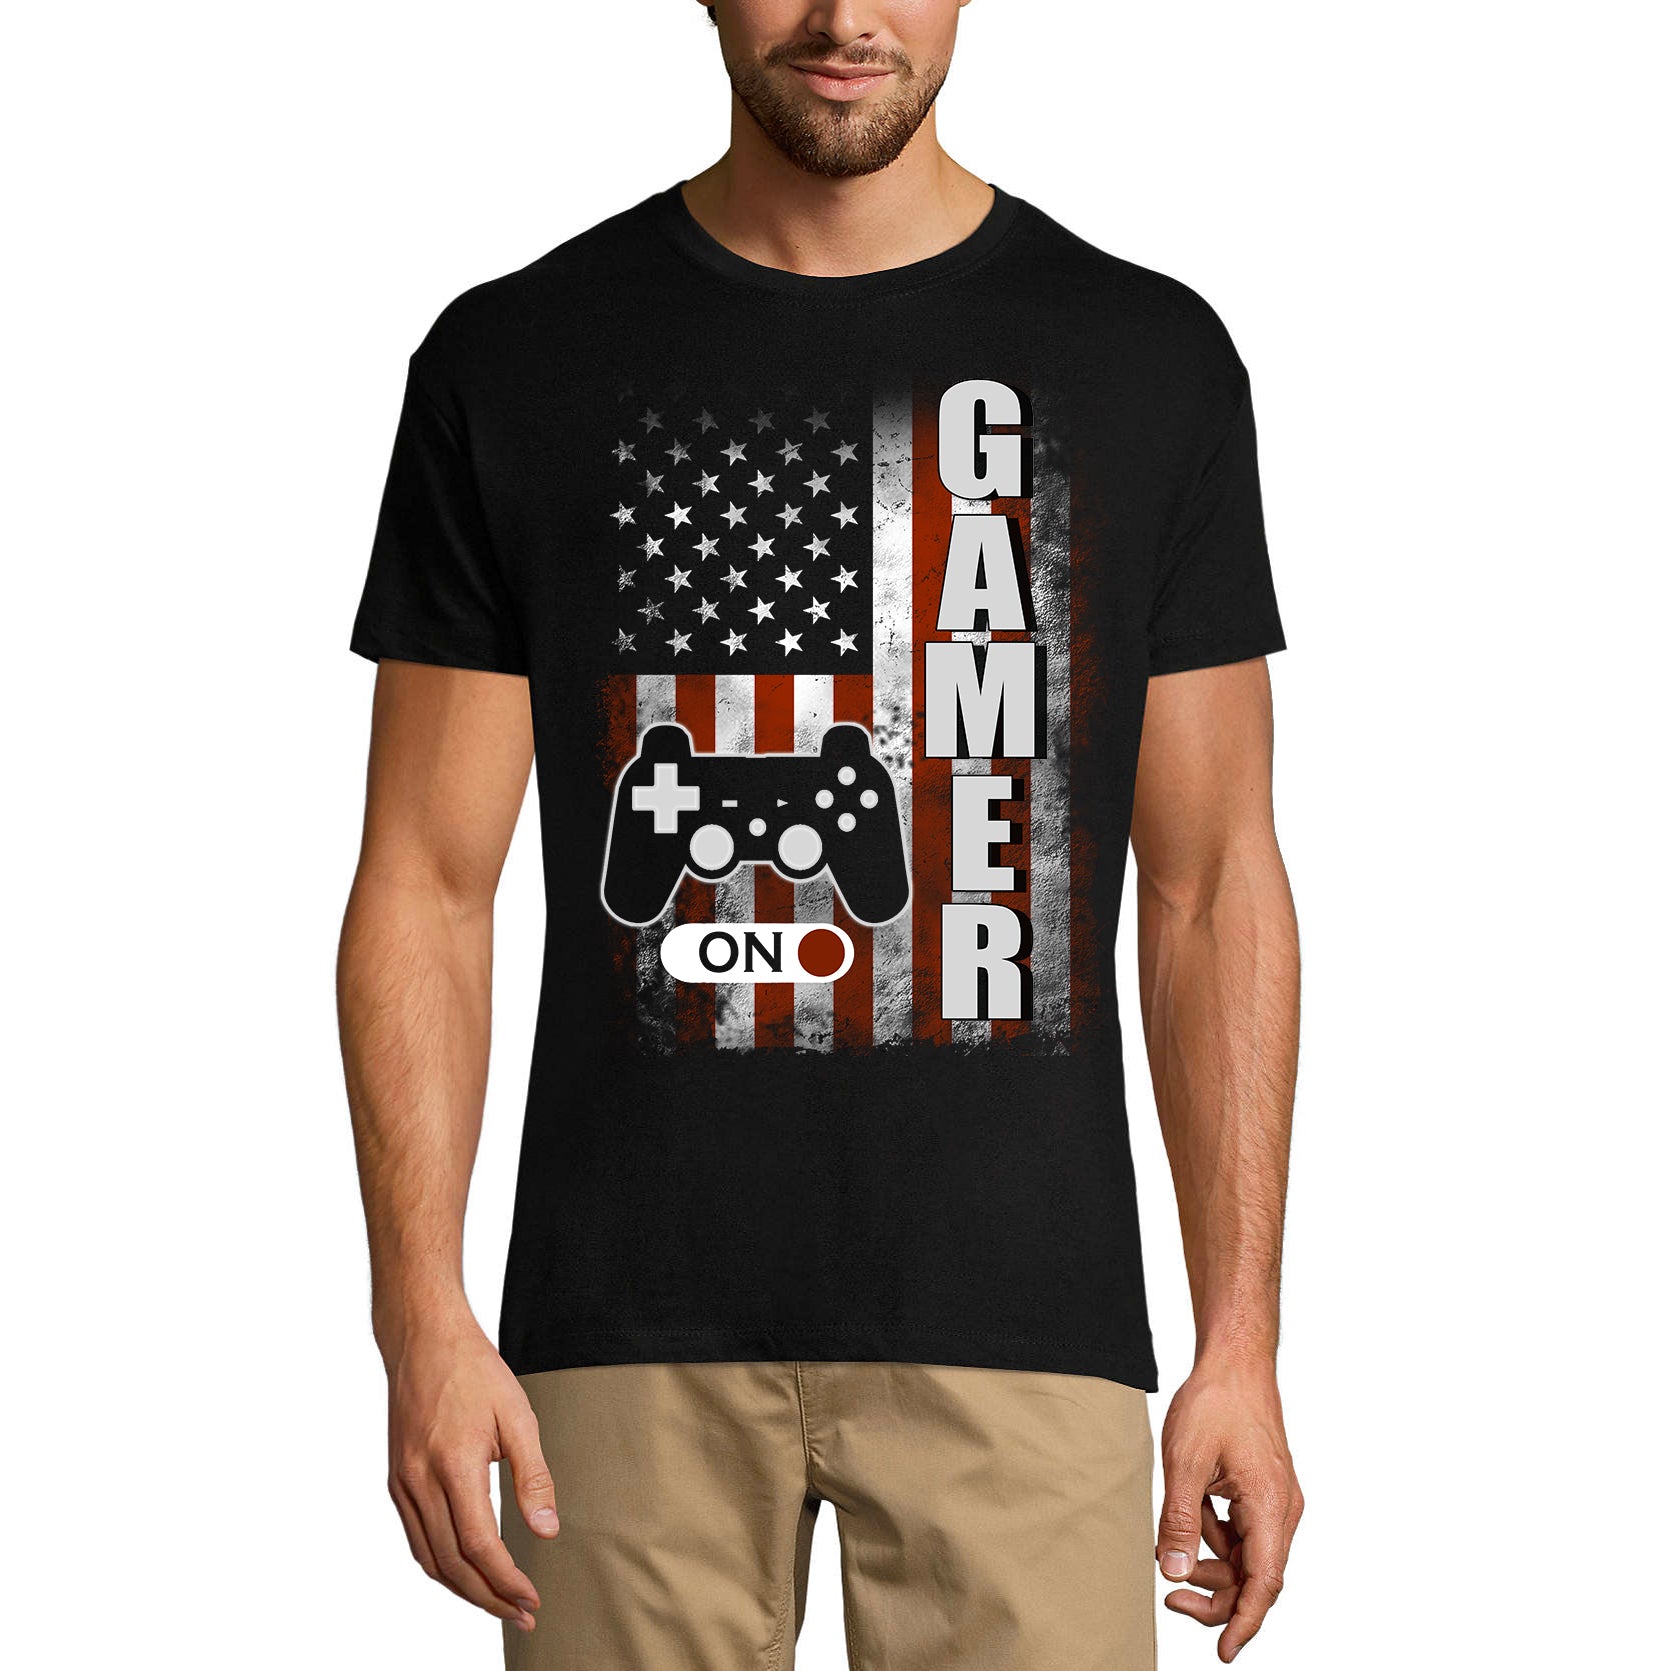 ULTRABASIC Men's T-Shirt Gamer Mode On US Flag Patriotic - Gaming Shirt for Player mode on level up dad gamer i paused my game alien player ufo playstation tee shirt clothes gaming apparel gifts super mario nintendo call of duty graphic tshirt video game funny geek gift for the gamer fortnite pubg humor son father birthday